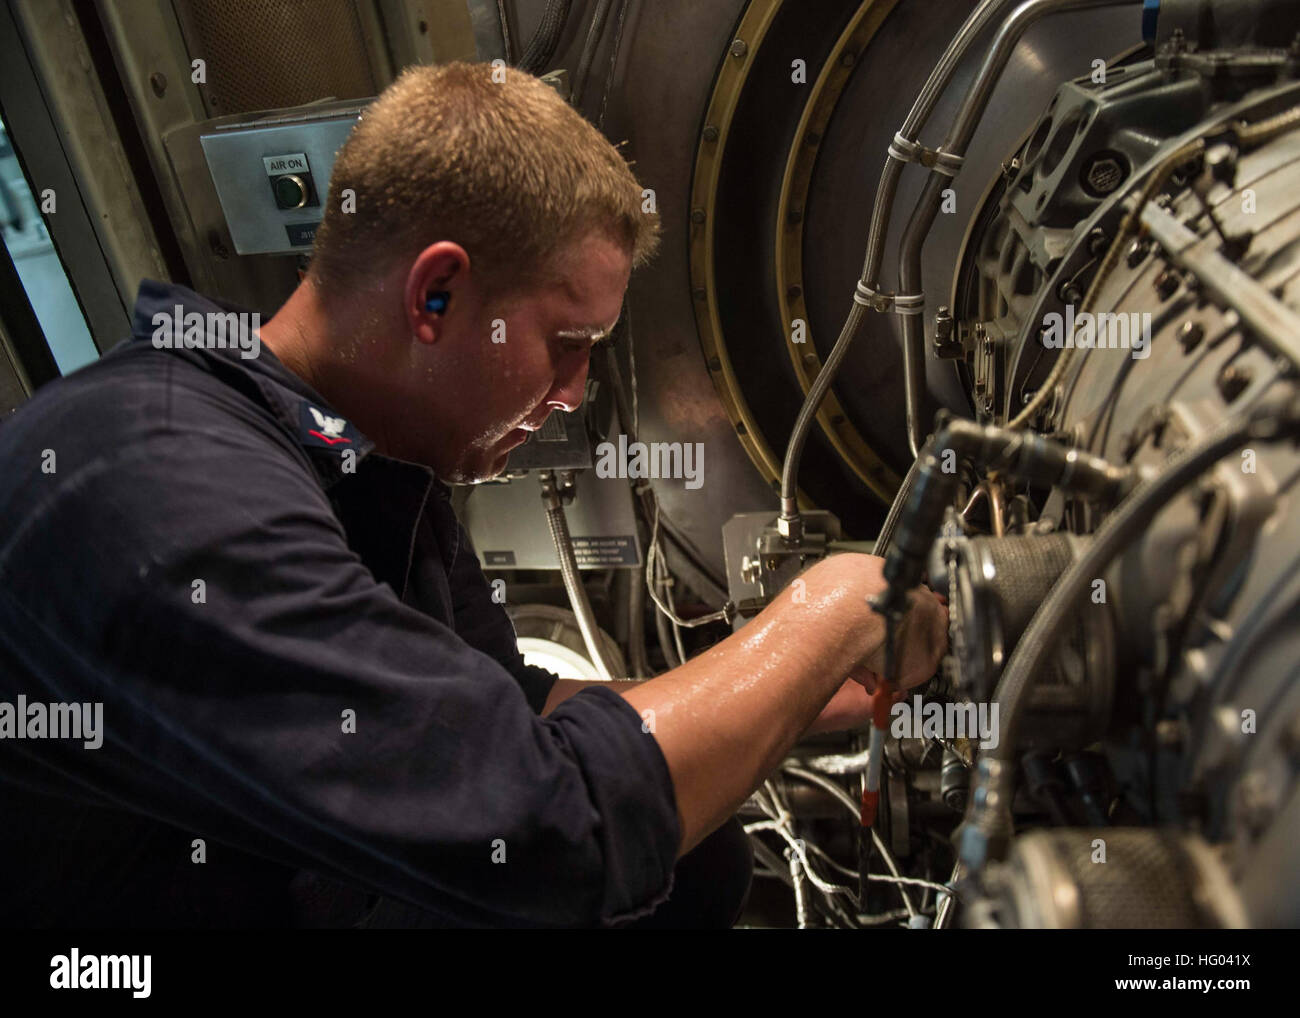 160827-N-GP524-508 NAVAL SUPPORT ACTIVITY BAHRAIN (Aug. 27, 2016) Gas Turbine System Technician (Electrical) 3rd Class Nathan Super, from Sarasota, Fla., conducts maintenance in an engineering space aboard the guided-missile destroyer USS Stout (DDG 55). Stout, deployed as part of the Eisenhower Carrier Strike Group, is supporting maritime security operations and theater security cooperation efforts in the U.S. 5th Fleet area of operations. (U.S. Navy photo by Mass Communication Specialist 3rd Class Bill Dodge) USS STOUT (DDG 55) DEPLOYMENT 2016 160827-N-GP524-508 Stock Photo